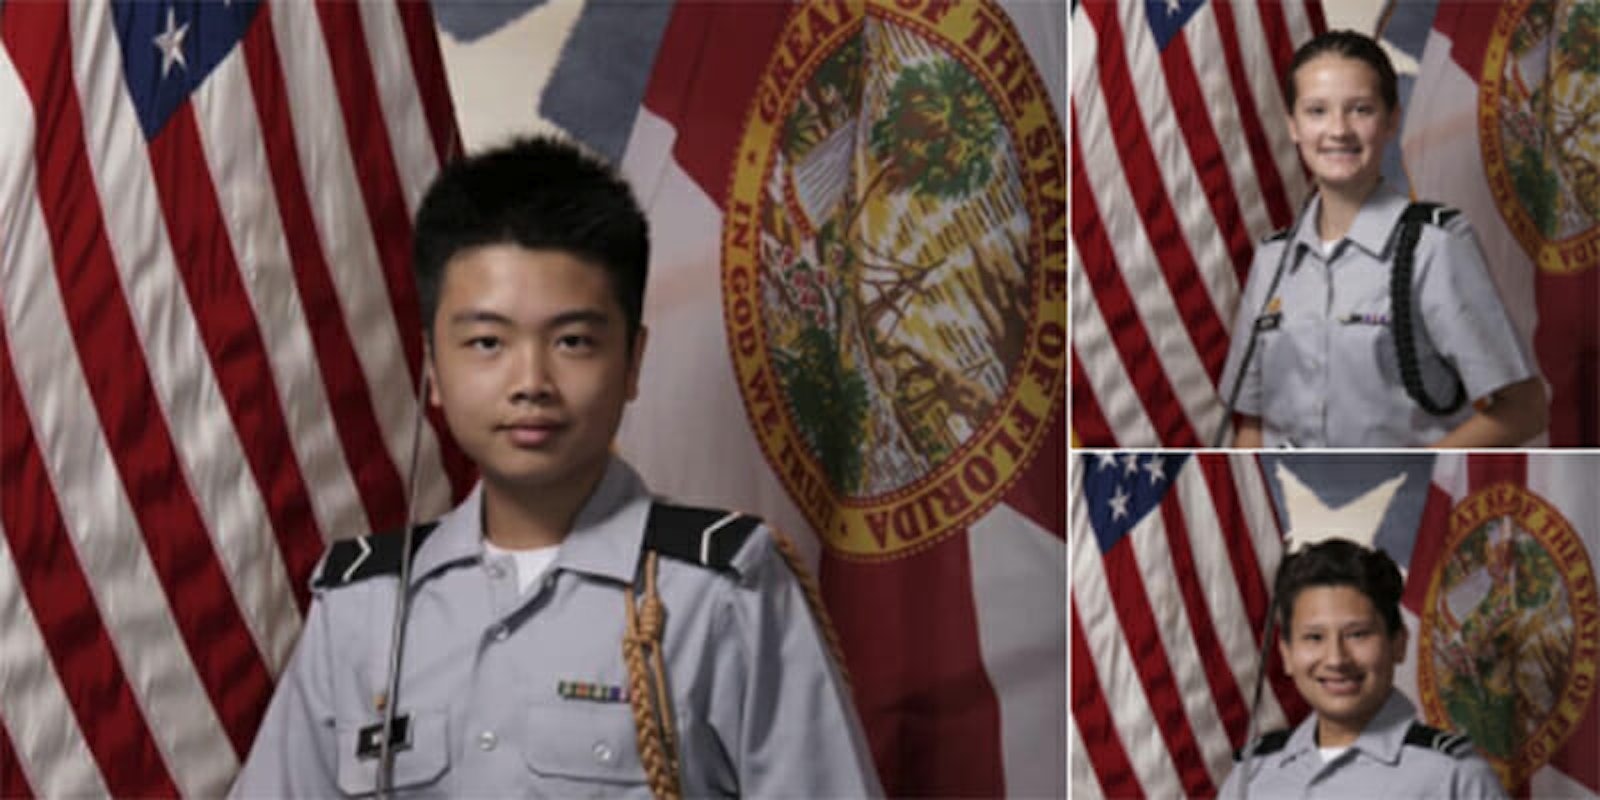 The U.S. Army awarded three Parkland shooting victims with the Medal of Heroism.